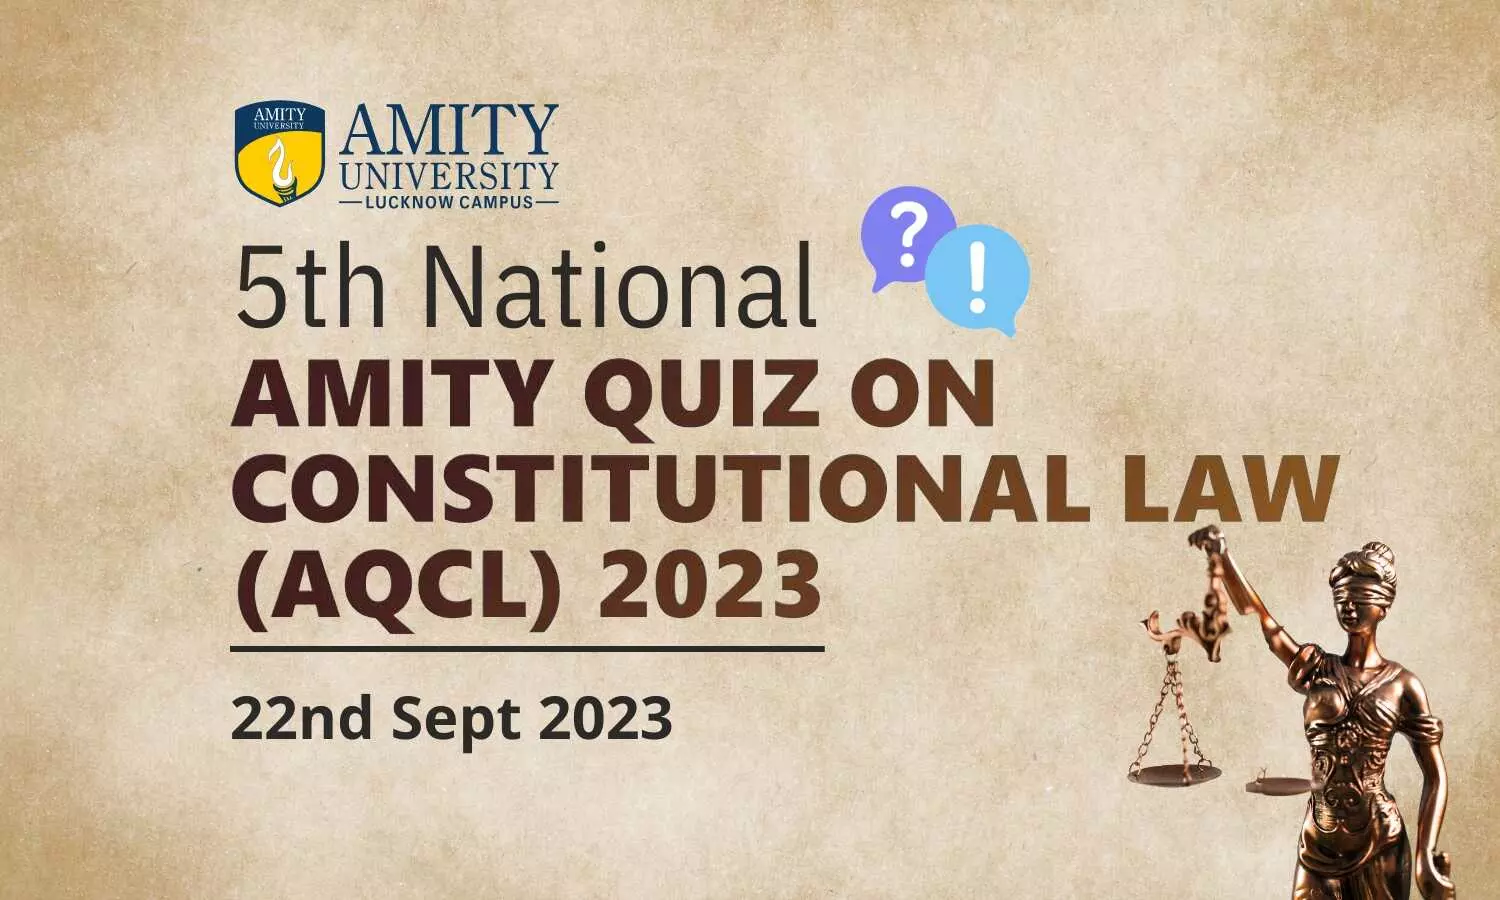 5th National Amity Quiz On Constitutional Law By Amity Law School, Auup Lucknow Campus